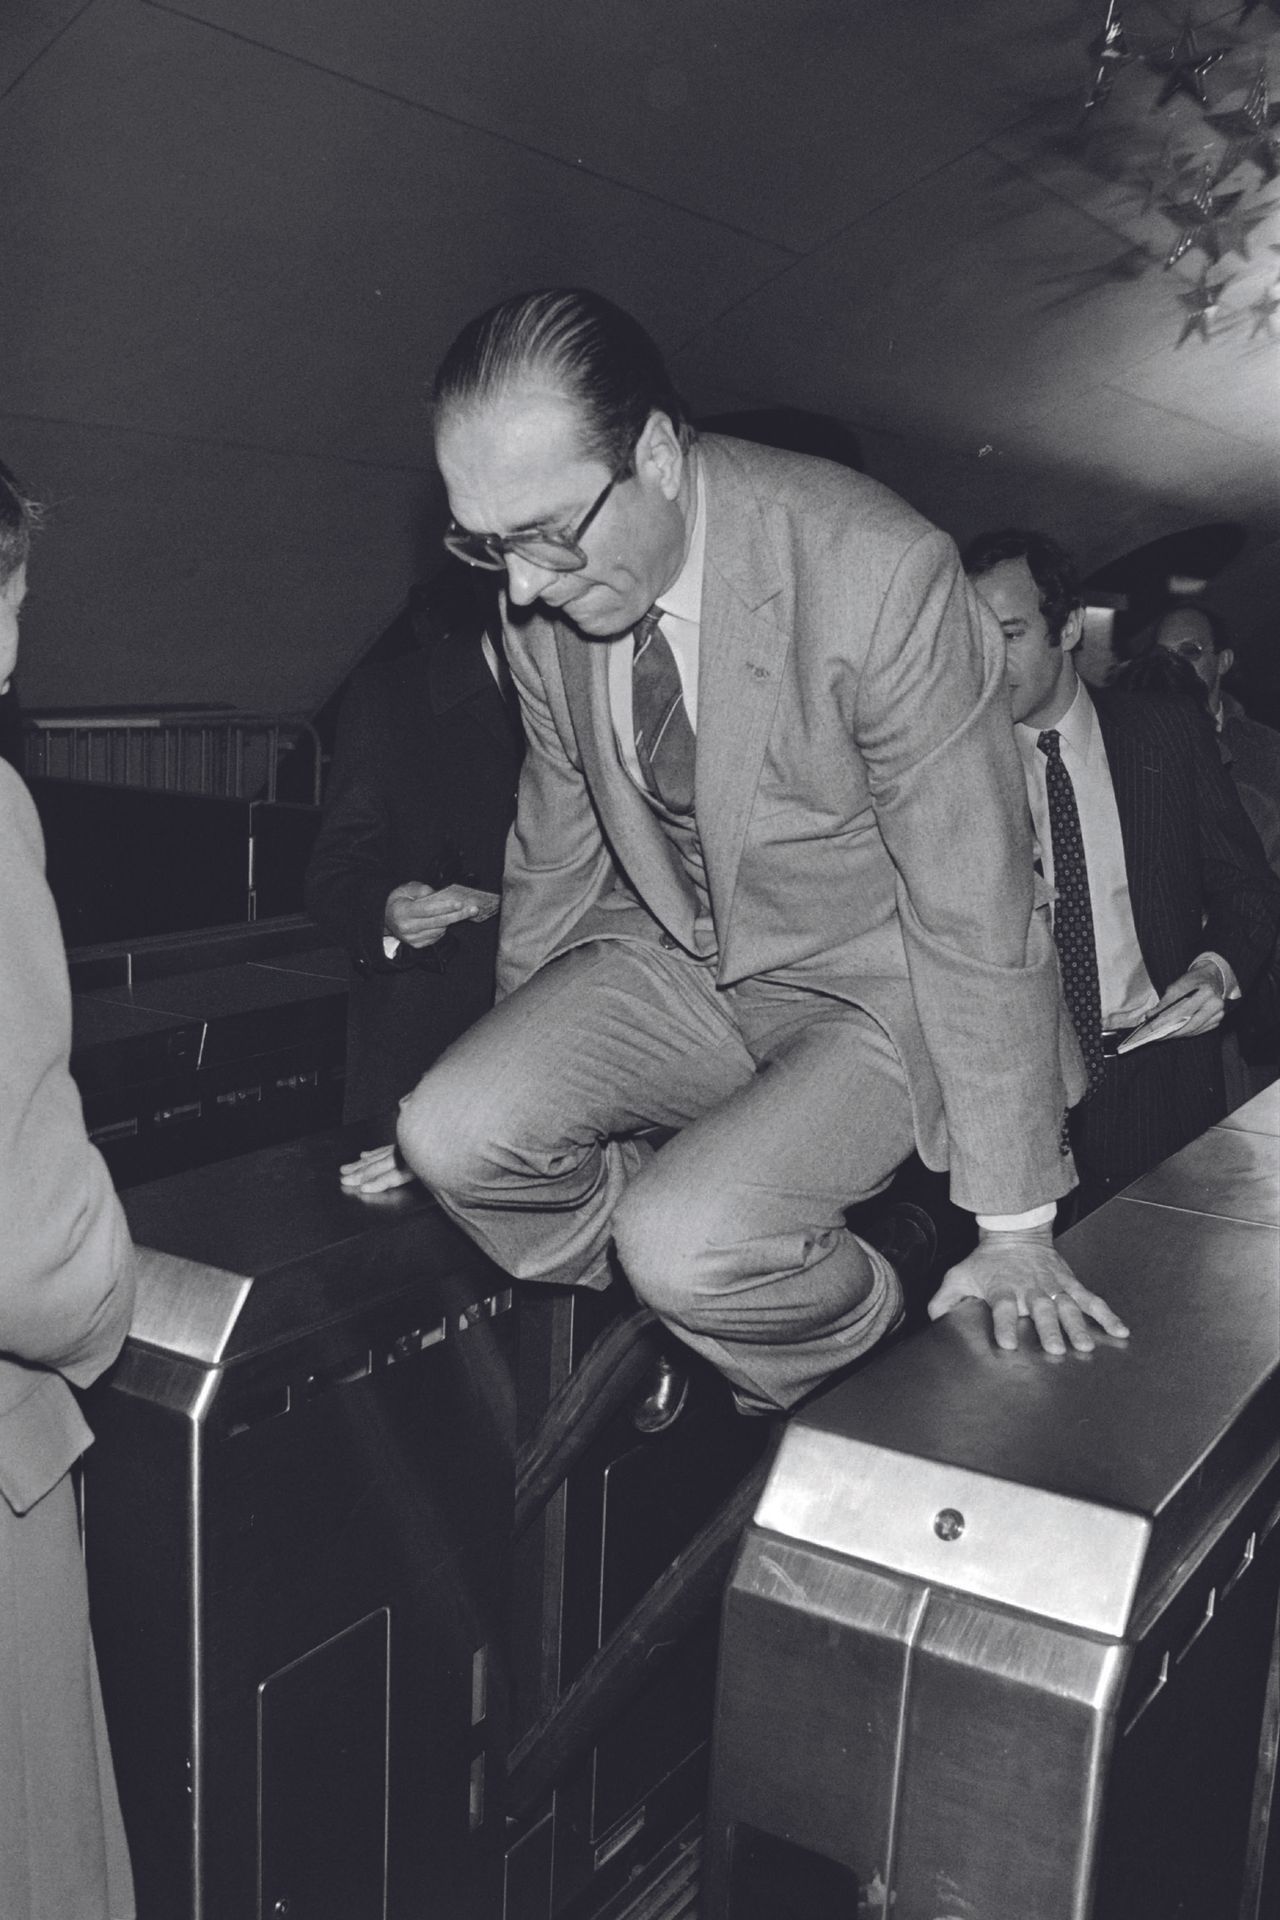 AFP - Jean-Claude DELMAS AFP - Jean-Claude DELMAS

Paris Mayor Jacques Chirac on&hellip;